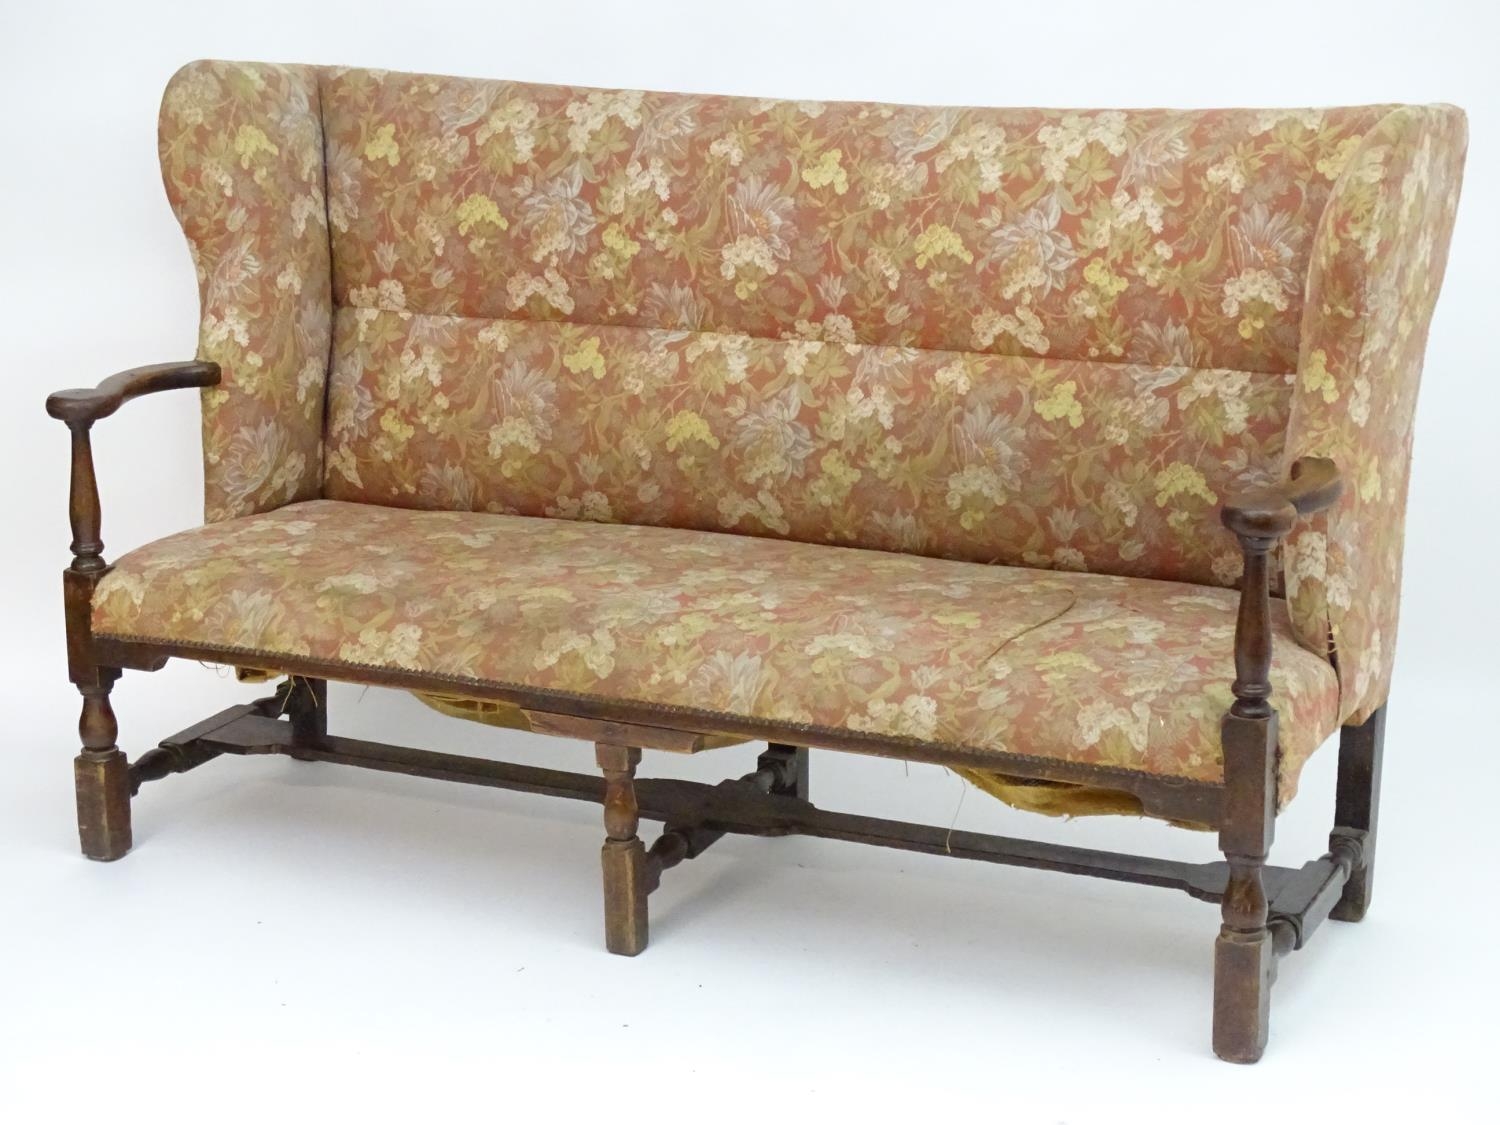 A mid 18thC wingback sofa with scrolled arms and an upholstered backrest and seat above a - Image 5 of 12